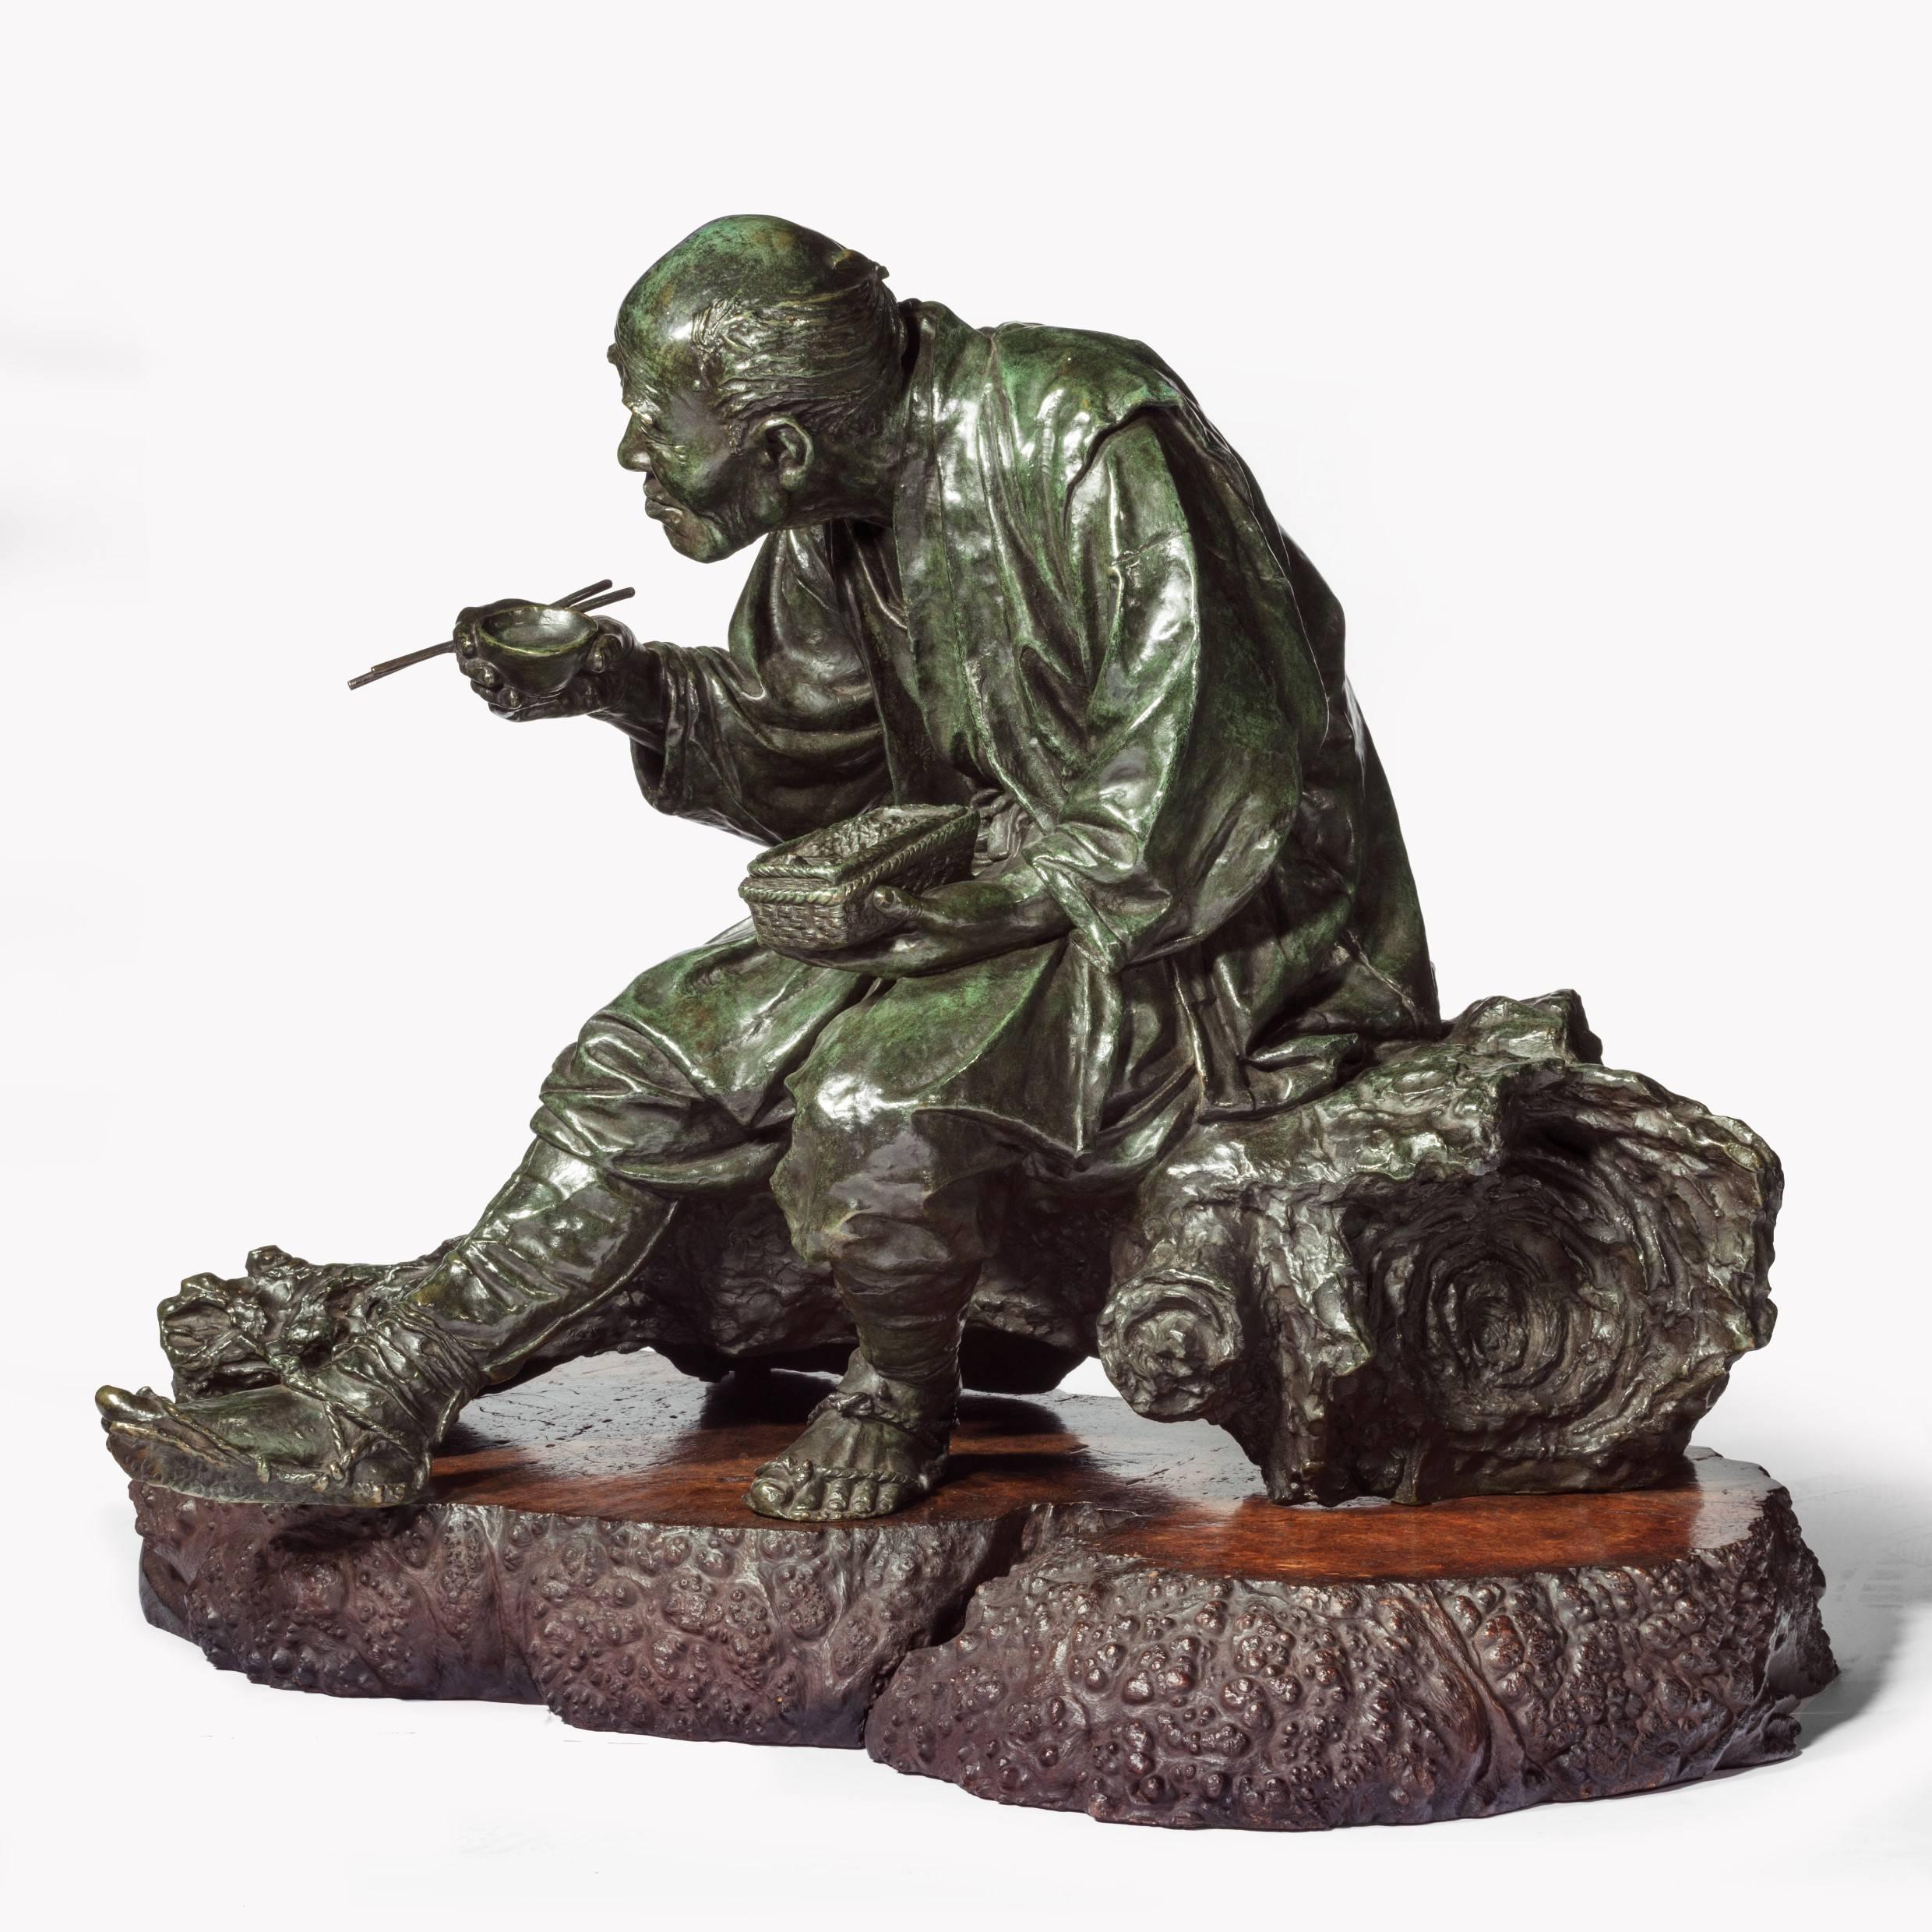 A superb and large Tokyo school bronze of a peasant by Udagawa Kazuo,
He is shown sitting on a fallen tree branch eating his meal, holding a pair of chop sticks and a cup in his right hand and a woven basket of food in his left, with marvellous